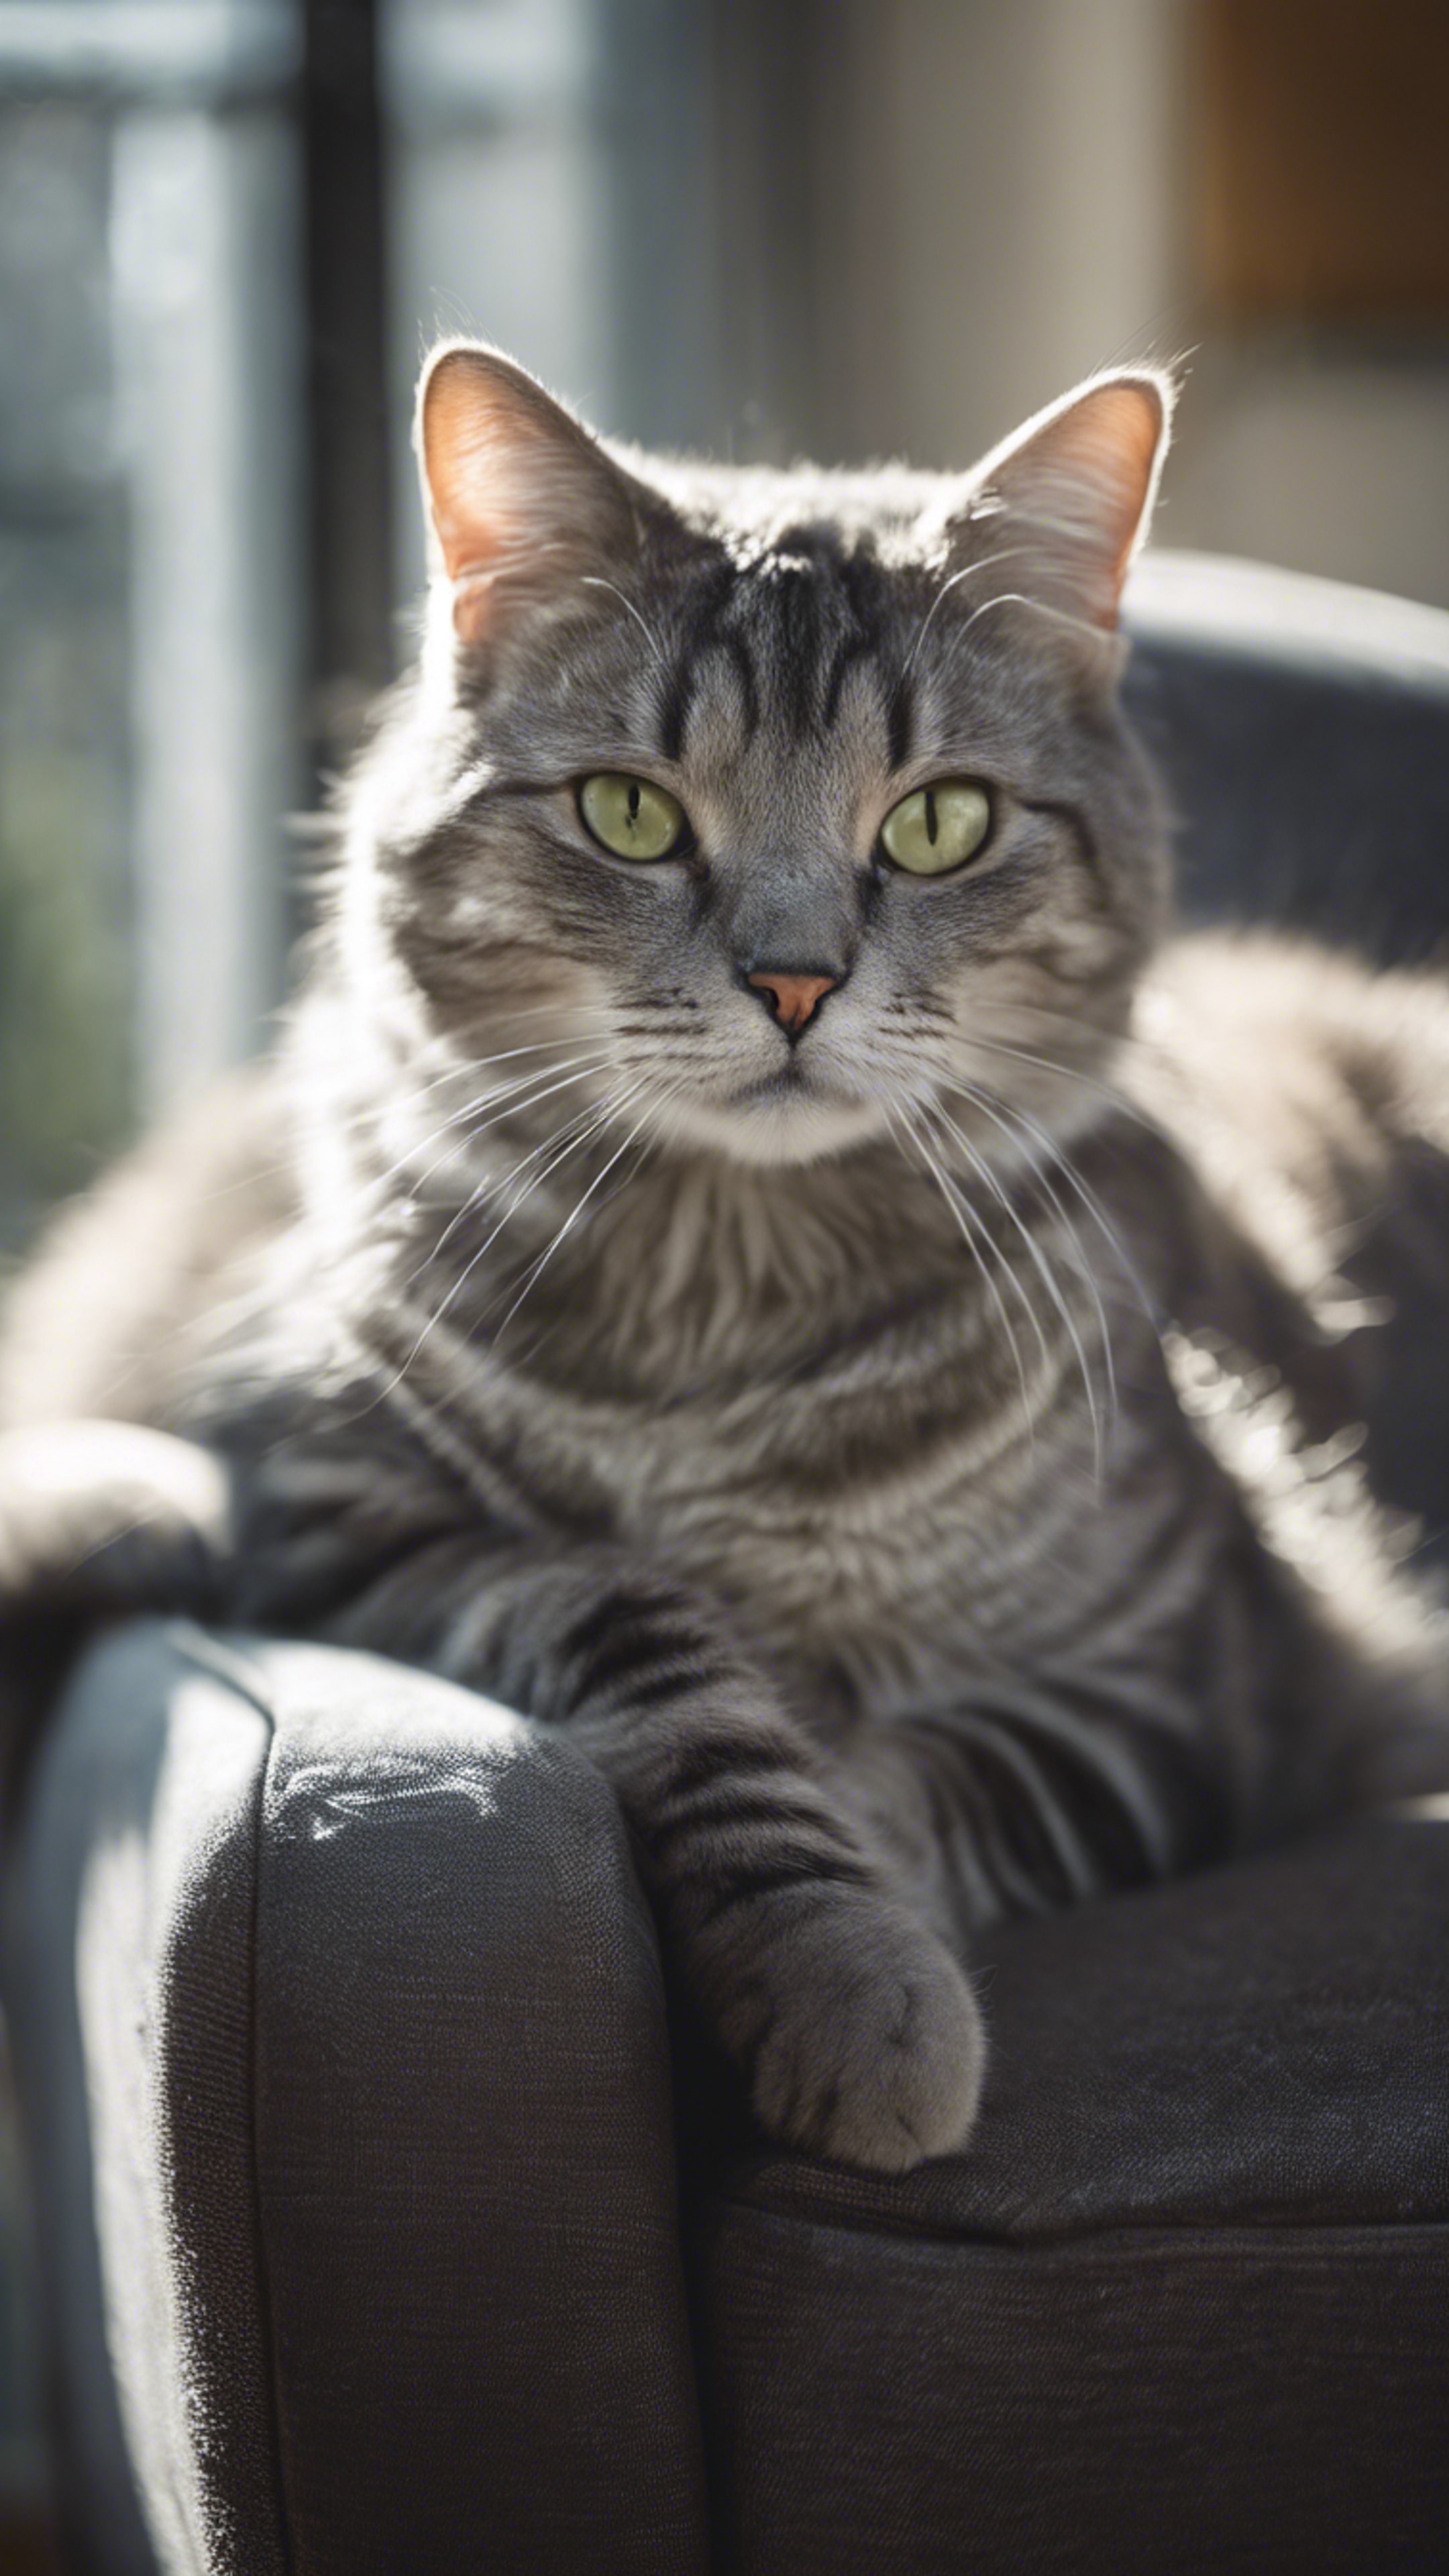 A silver gray tabby cat curled up in a chair, her fur highlighted by daylight streaming through a nearby window. Tapeta[04135cc69b2c493b883e]